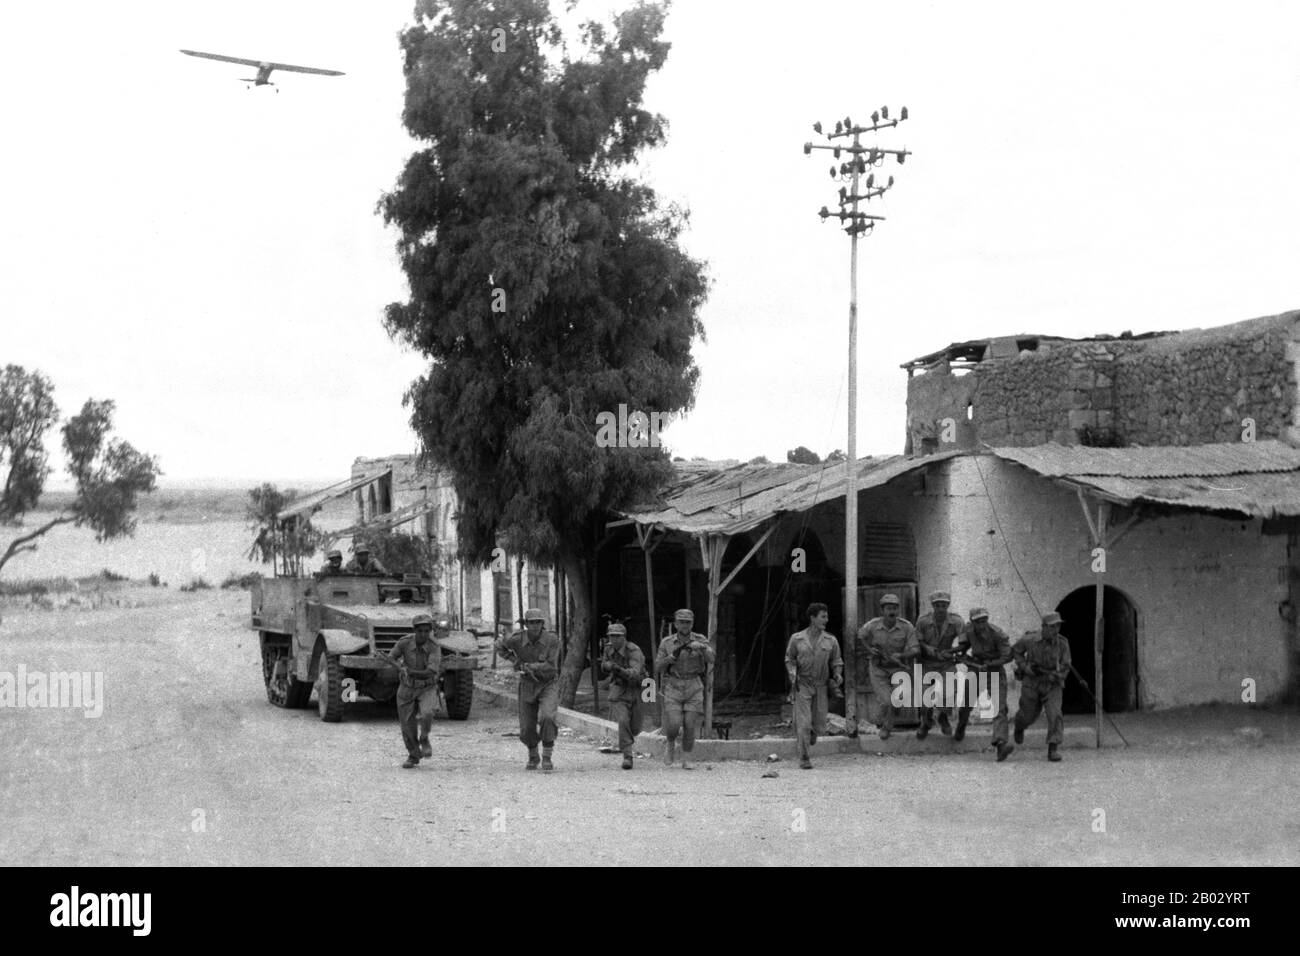 Operation Yoav (also called Operation Ten Plagues or Operation Yo'av) was an Israeli military operation carried out from 15–22 October 1948 in the Negev Desert, during the 1948 Arab–Israeli War.  Its goal was to drive a wedge between the Egyptian forces along the coast and the Beersheba–Hebron–Jerusalem road and ultimately to conquer the whole Negev. Operation Yoav was headed by the Southern Front commander Yigal Allon. Stock Photo